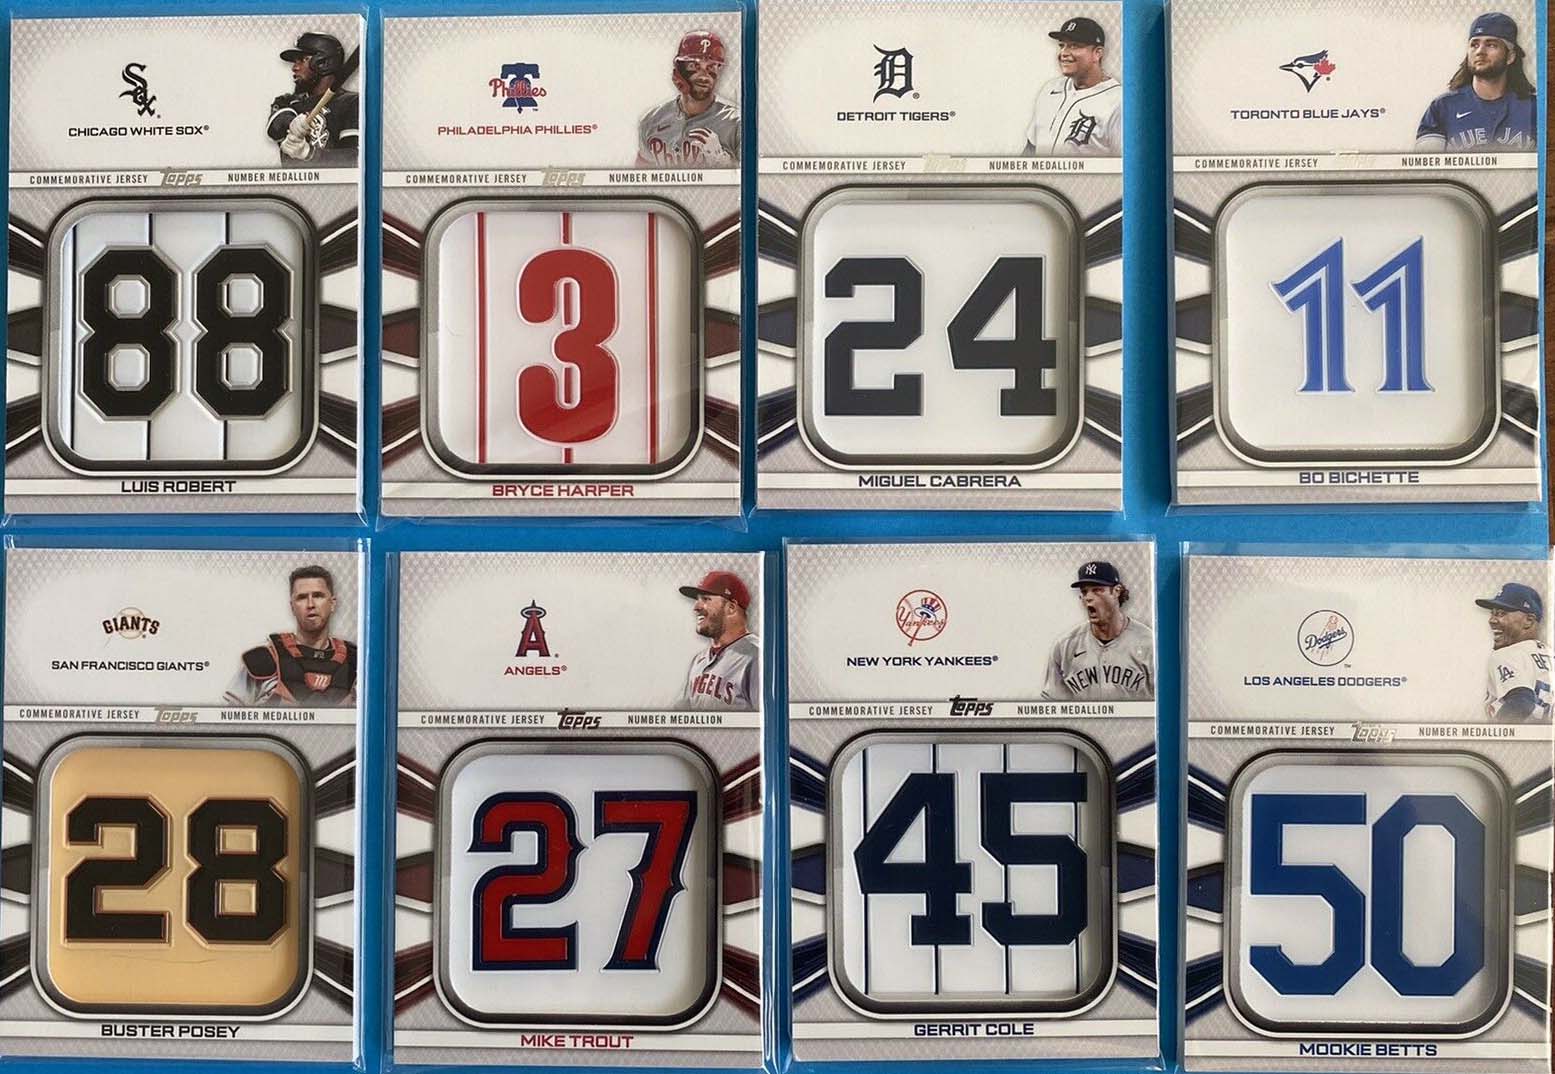 2022 Topps Series 1 MIKE TROUT Player Jersey Number Medallion Card # JNM-MT